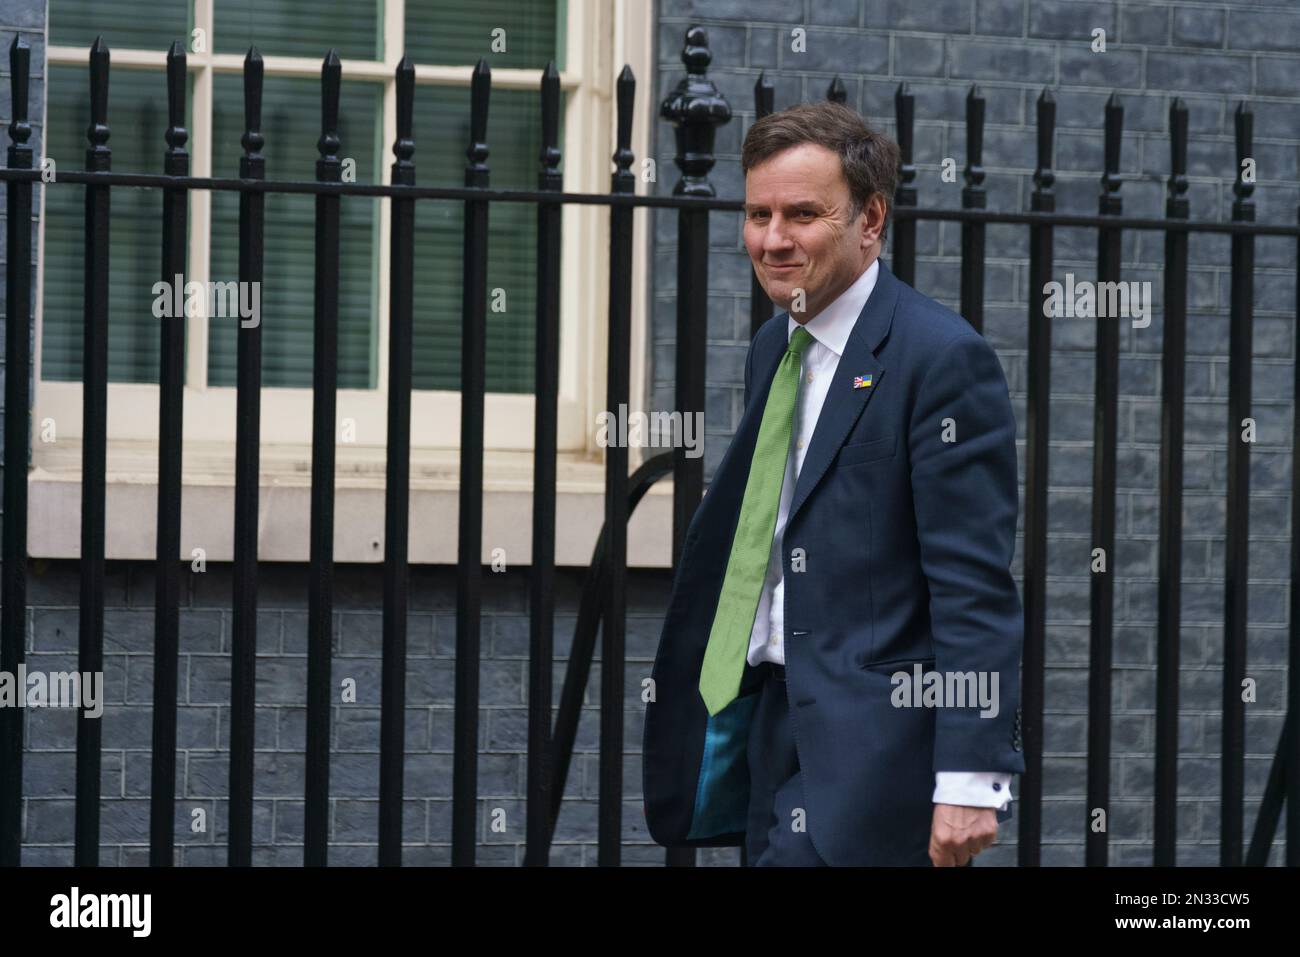 Downing St, London, 7th February 2023, UK Following this mornings reshuffle, Cabinet Ministers arrive for a delayed cabinet meeting held in the afternoon.  PICTURED: Greg Hands, newly appointed Conservative Party Chairman Bridget Catterall AlamyLiveNews Stock Photo